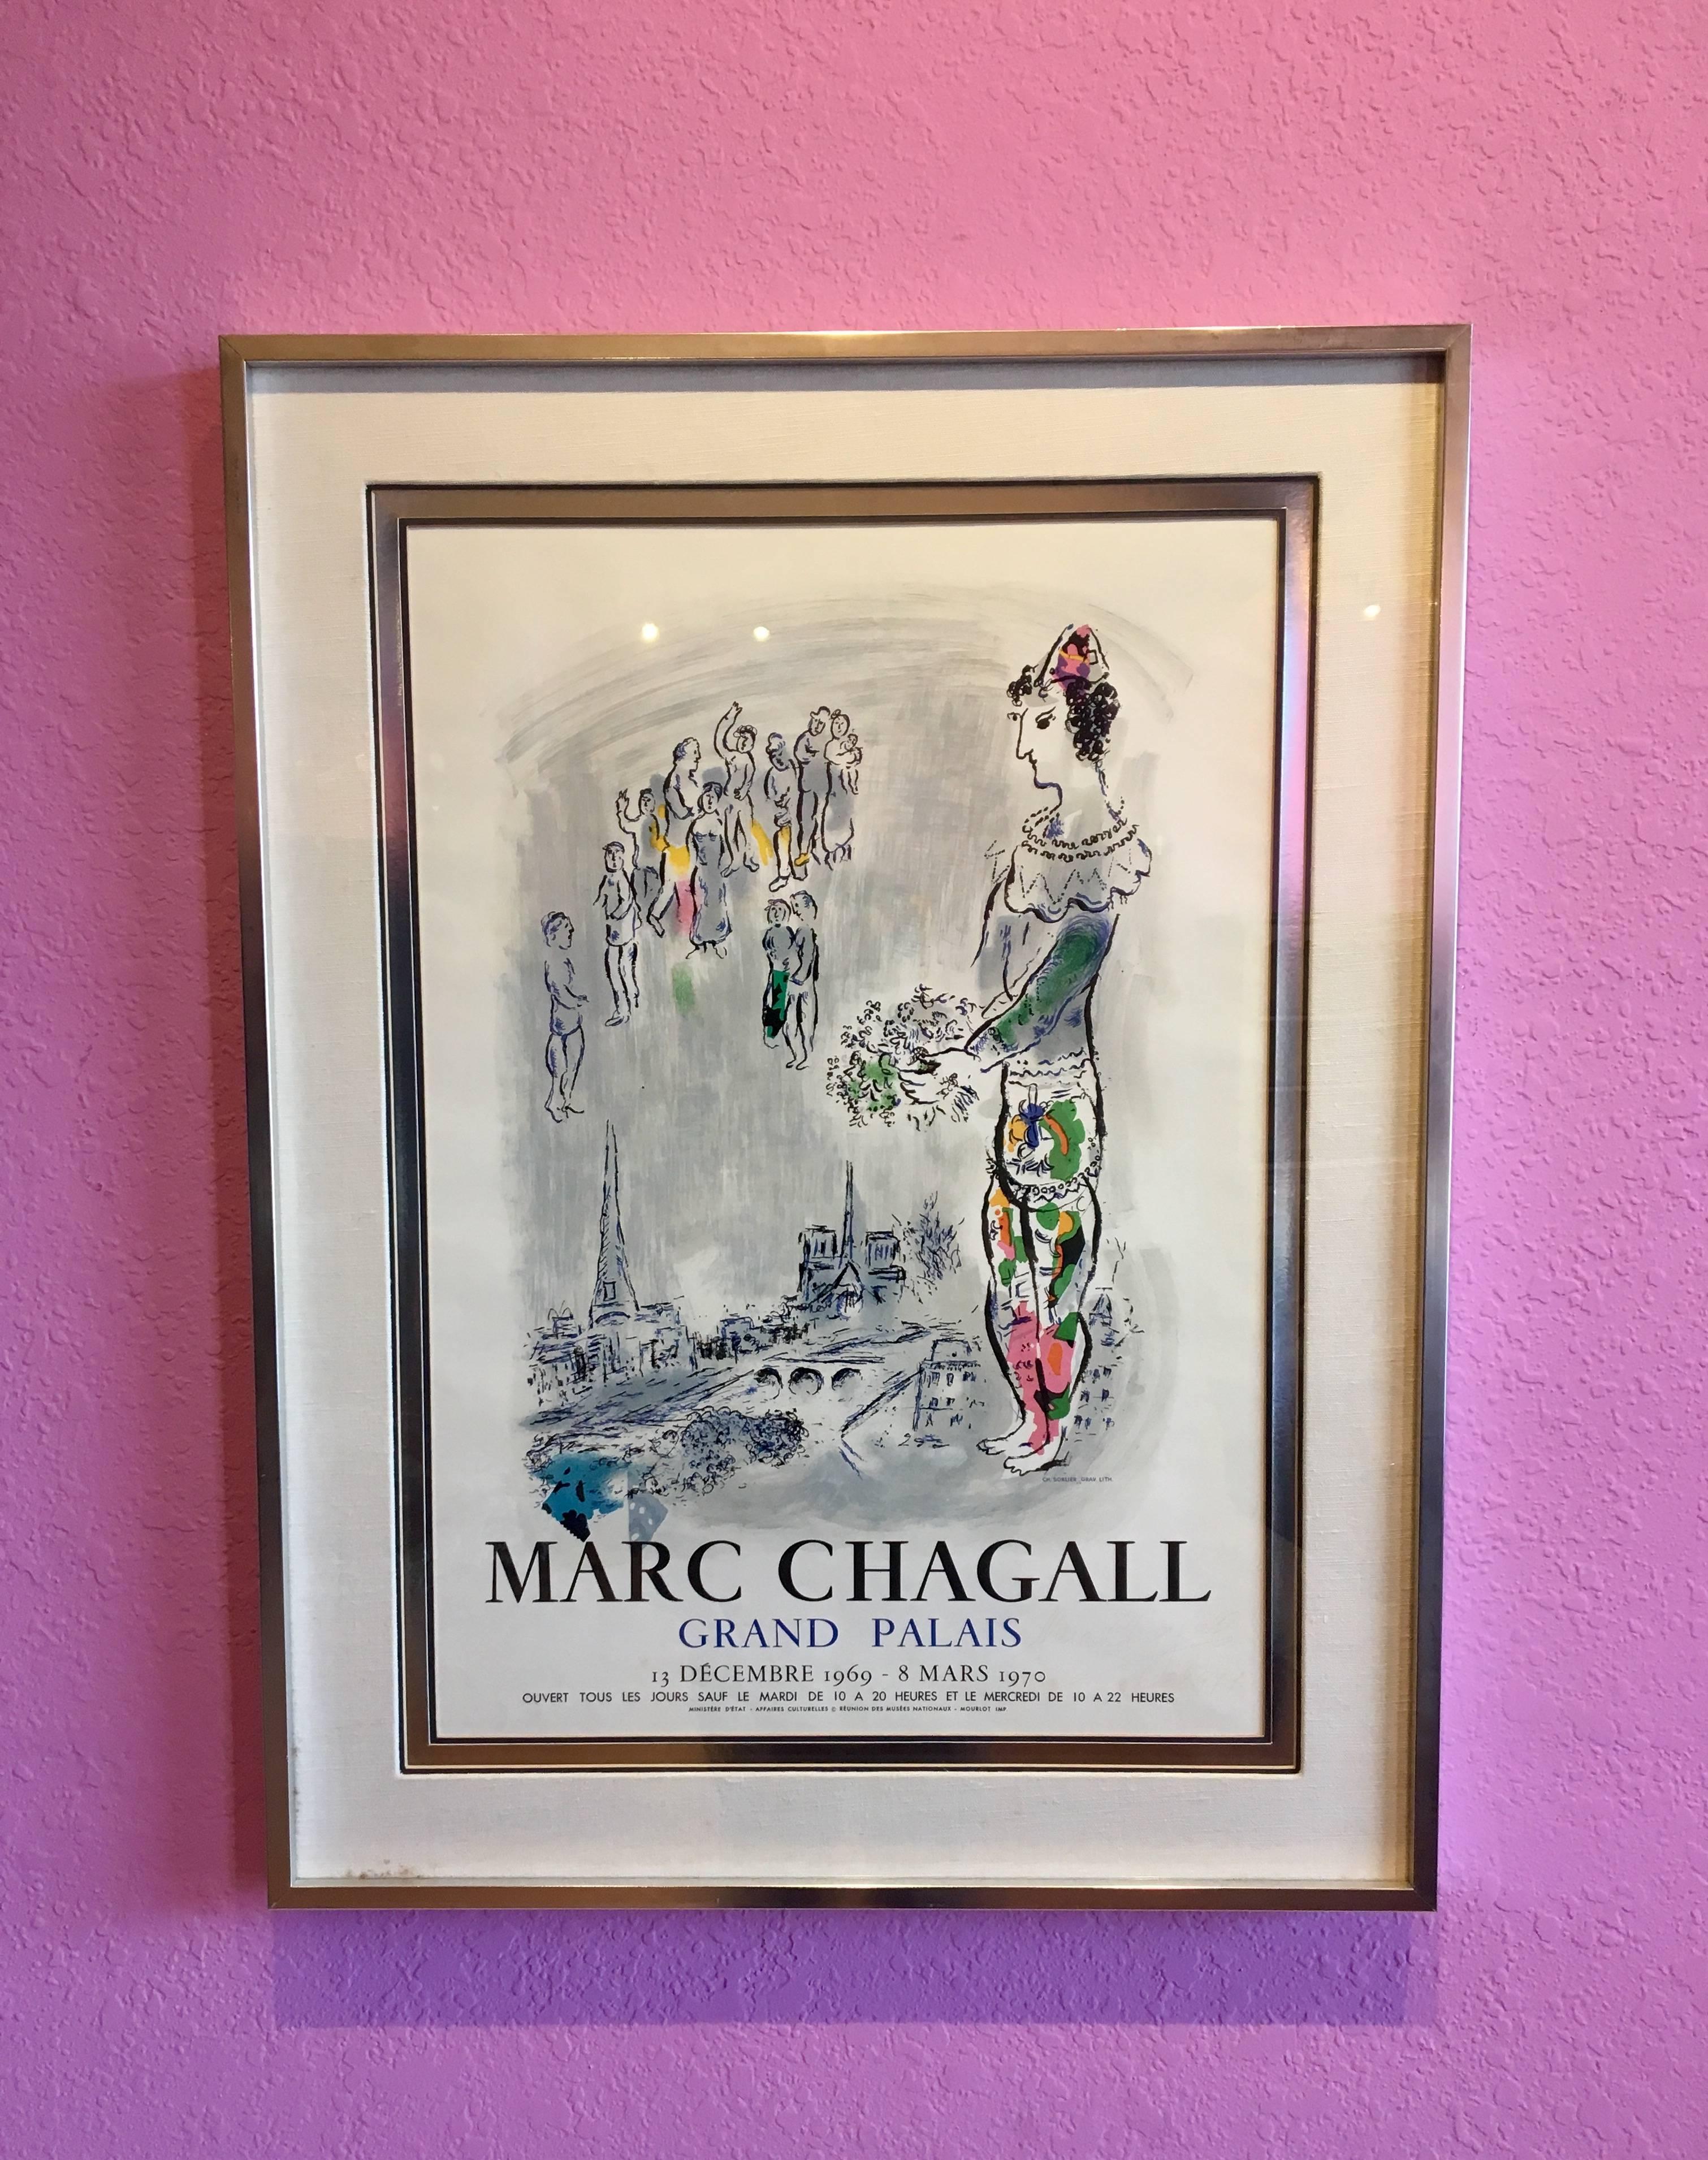 20th Century Rare Original Poster by Marc Chagall Signed Litho Le Grand Palais Mourlot